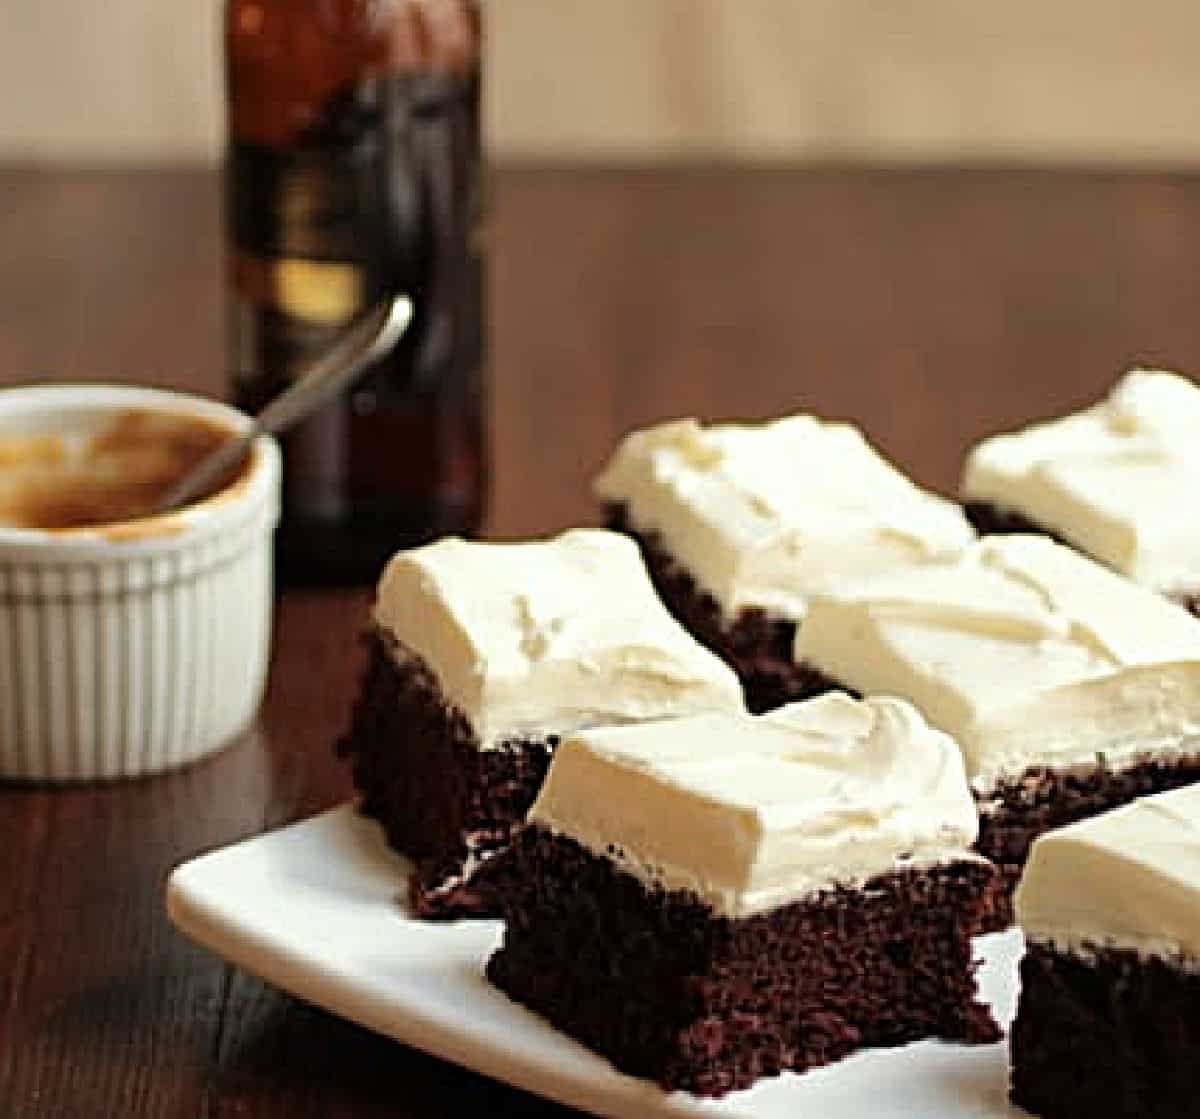 Cream topped chocolate cake squares on white plate, wooden table, stout bottle and white ramekin around